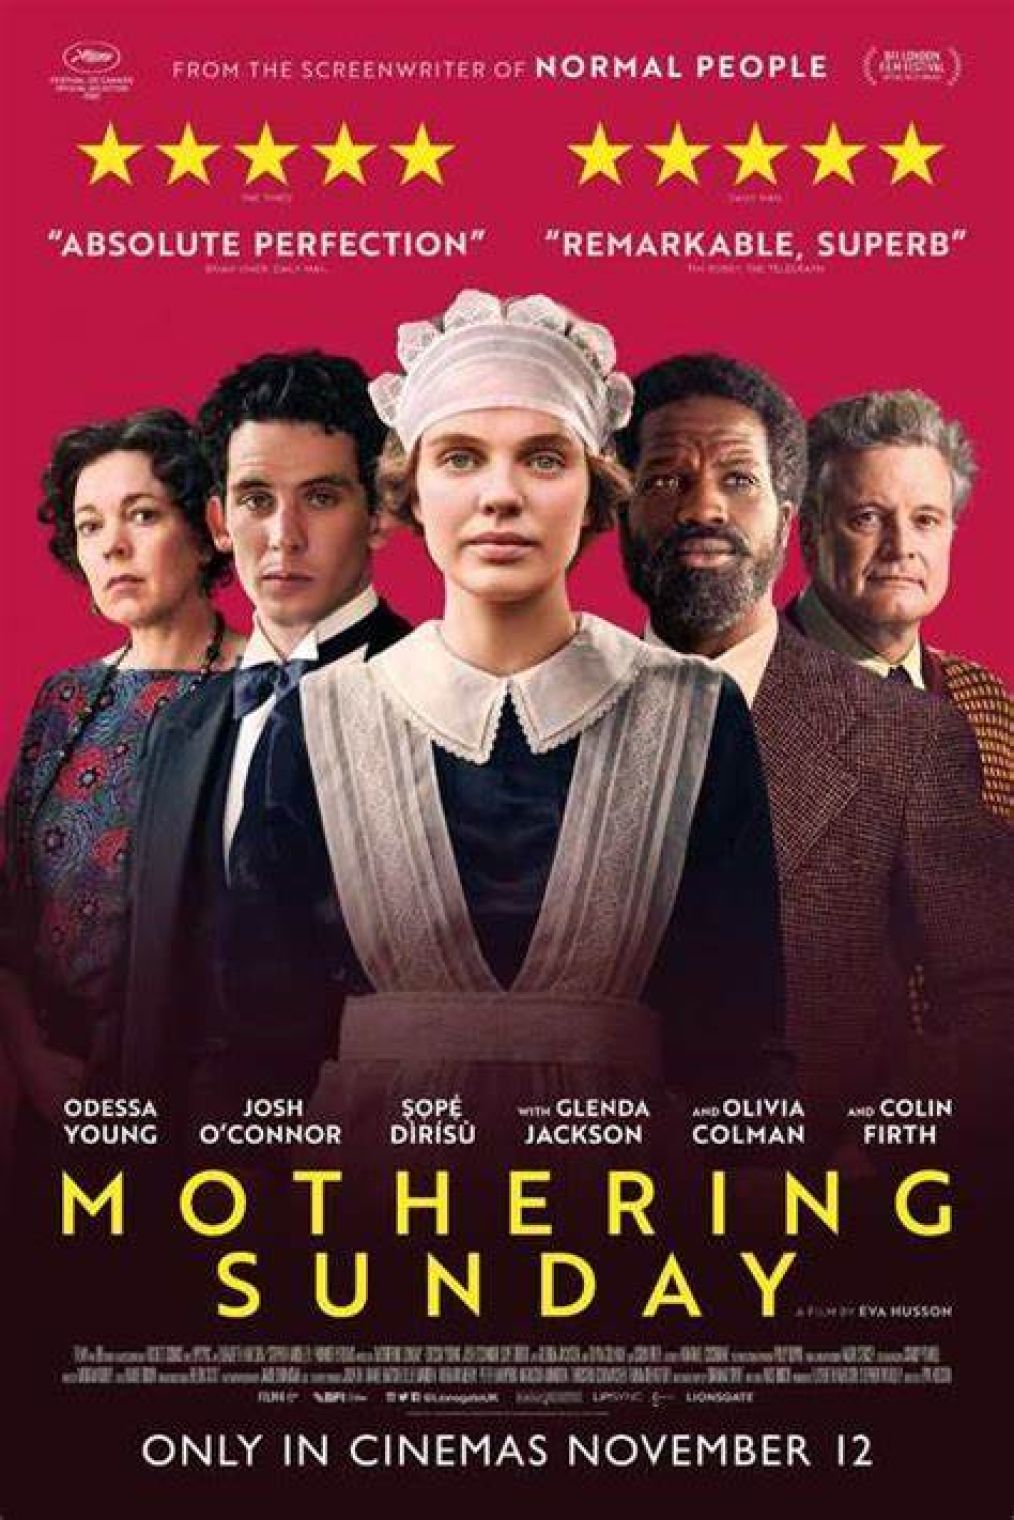 Sọpẹ́ Dìrísù stars in critically acclaimed romantic period drama Mothering Sunday, released in cinemas on Friday 12th November